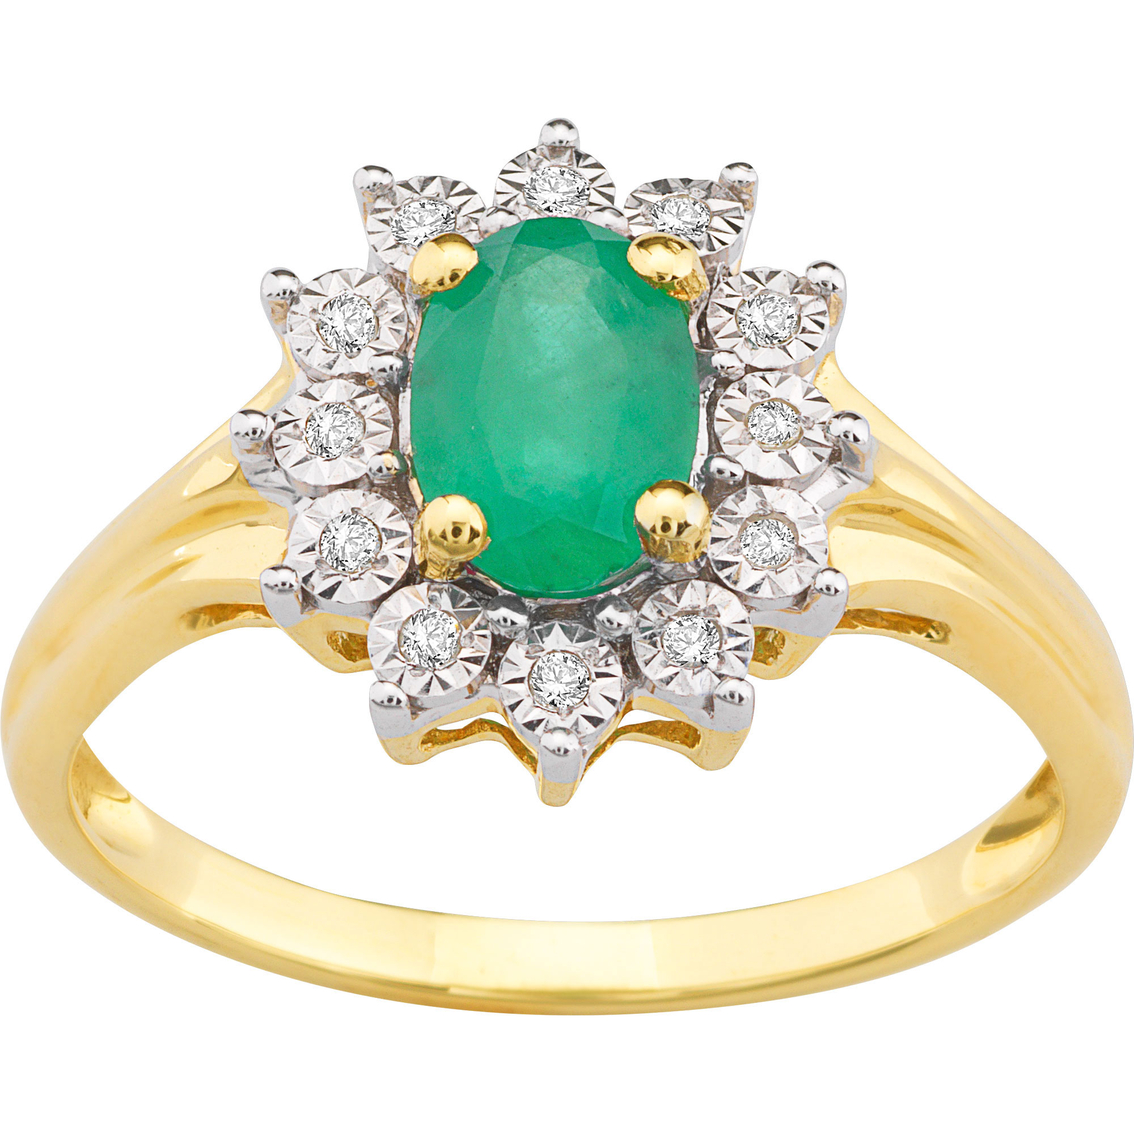 10k Yellow Gold Oval Emerald Ring With Diamond Accents, Size 7 ...